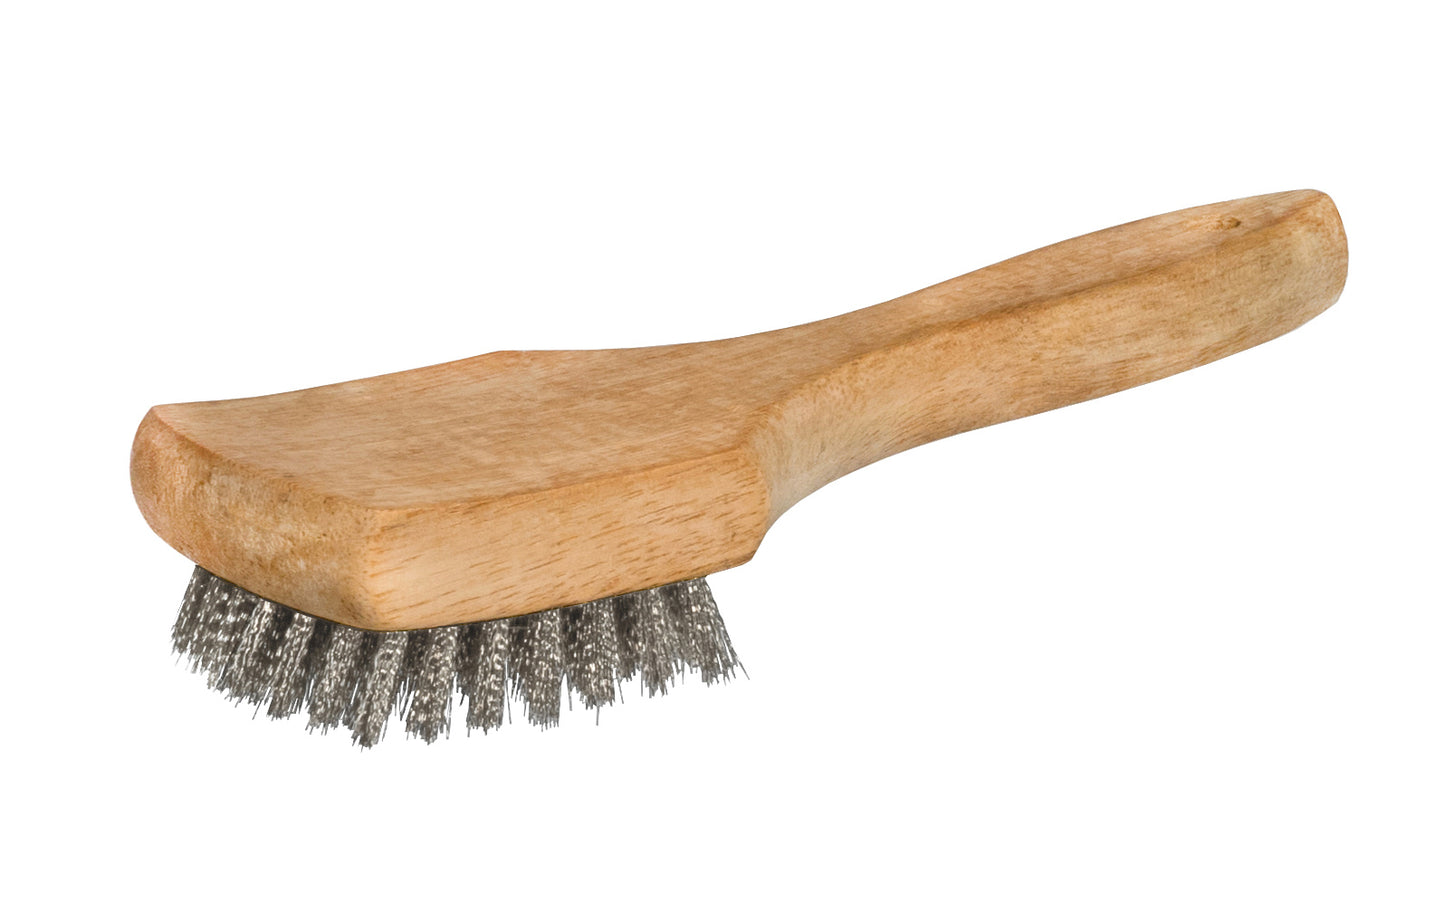 USA-made 8-1/2" long brush made by Magnolia. 3" x 2-1/2" Steel Bristles are staple set in durable wooden handle. General cleaning including for use in the shop, refinishing, stripping paint on home furniture, metal plating & finishing industries or for cleaning parts, sidewall tires - Model No. 6-S - Sidewall Brush